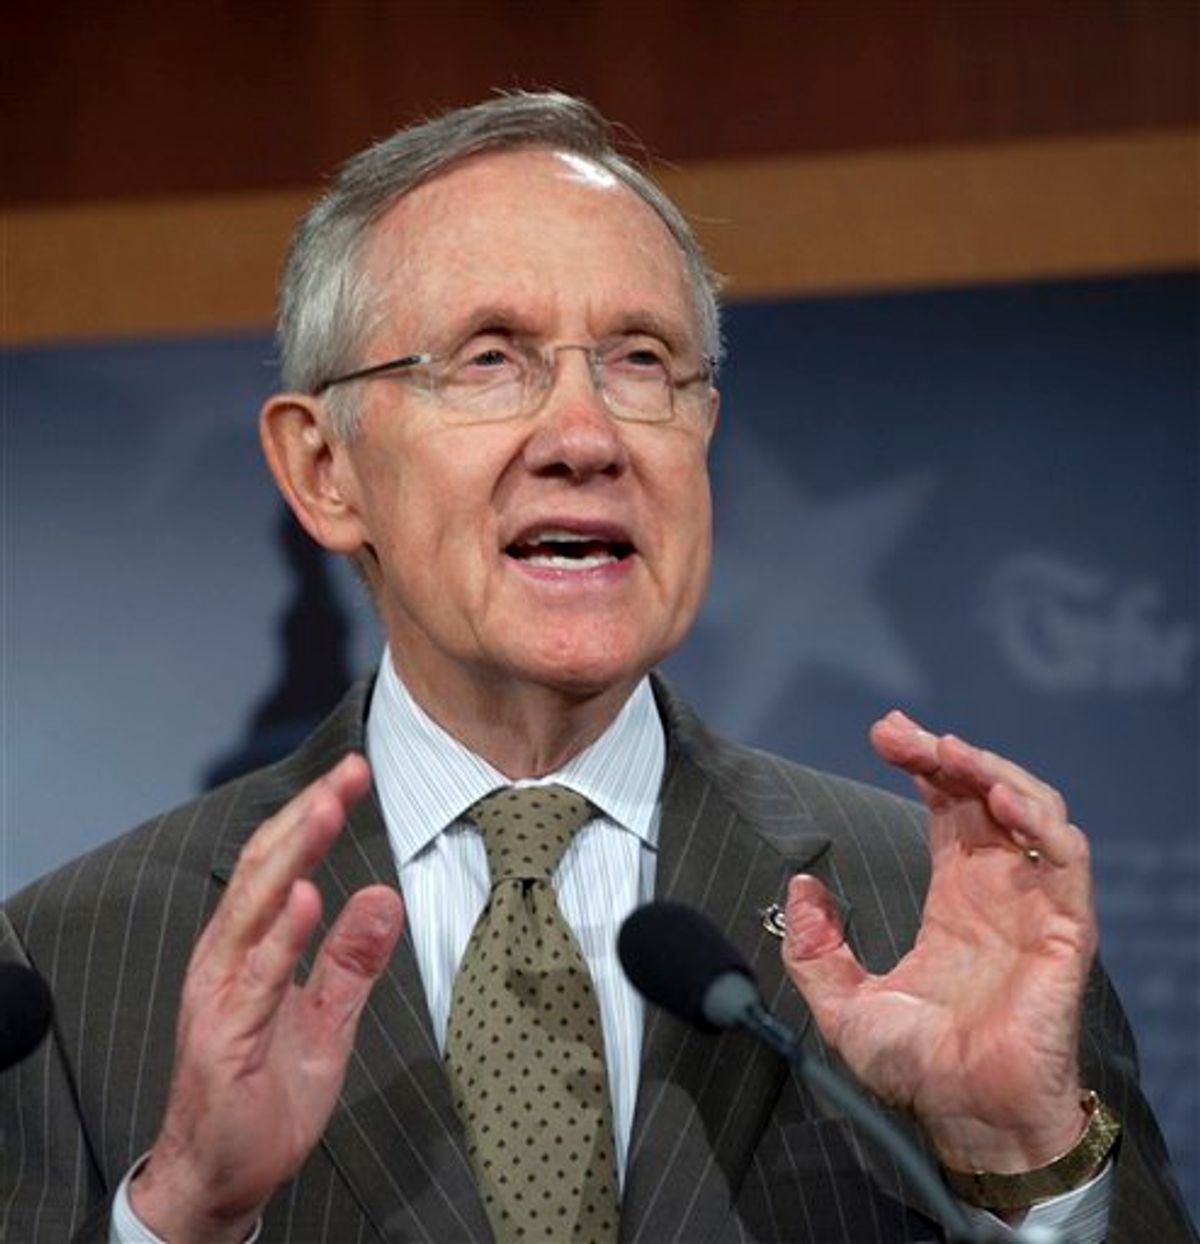 Senate Majority Leader Harry Reid of Nev. gestures during a news conference on Capitol Hill in Washington on Thursday, Sept. 22, 2011, to discuss FEMA funding and the Continuing Resolution to fund the government. (AP Photo/Harry Hamburg) (AP/Harry Hamburg)